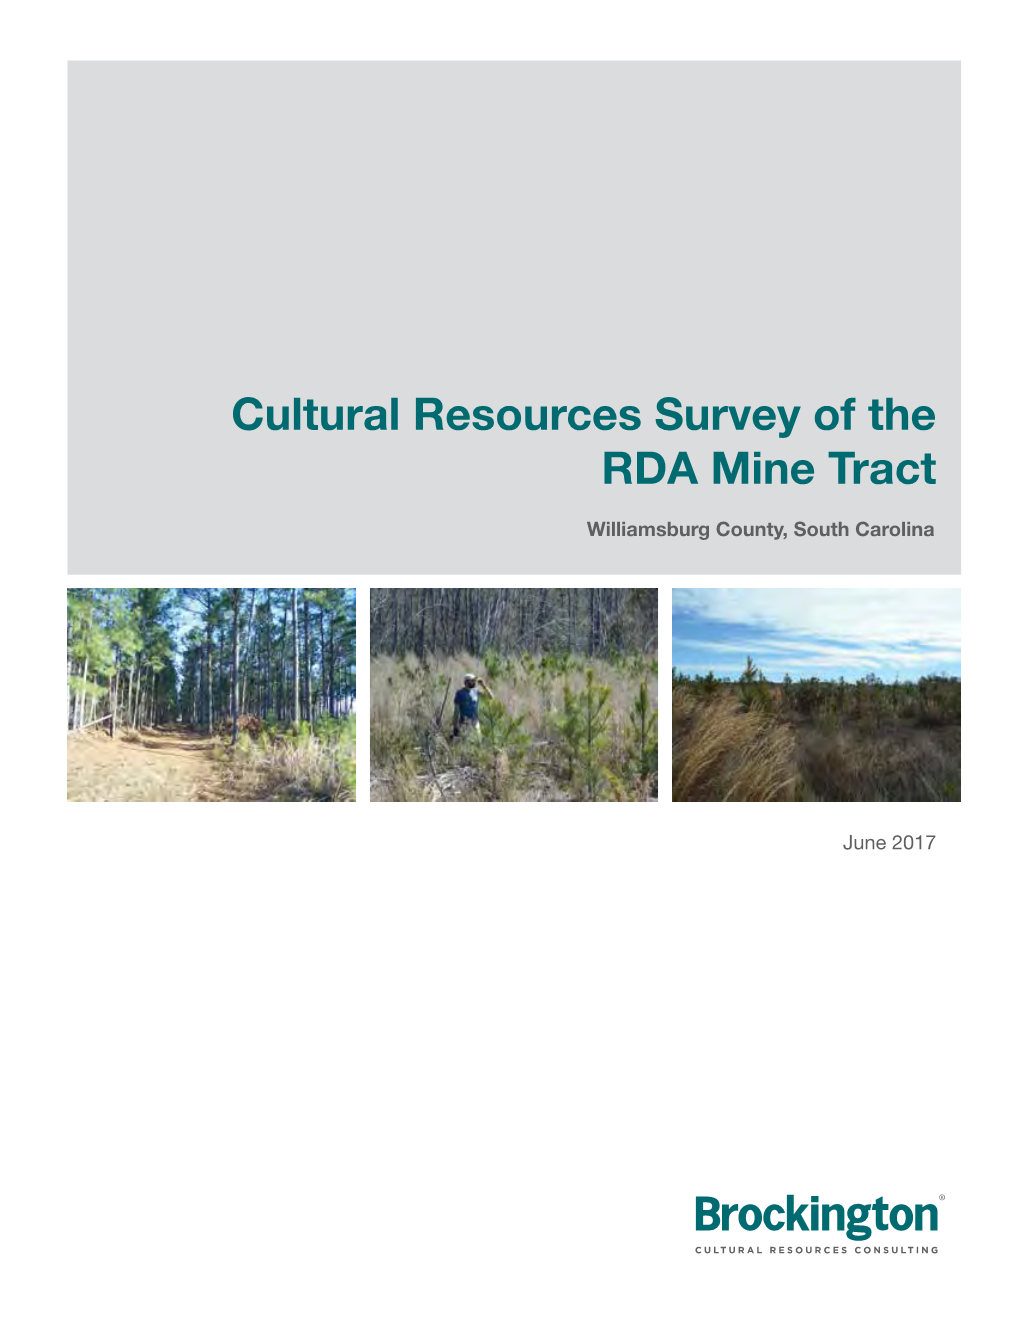 Cultural Resources Survey of the RDA Mine Tract